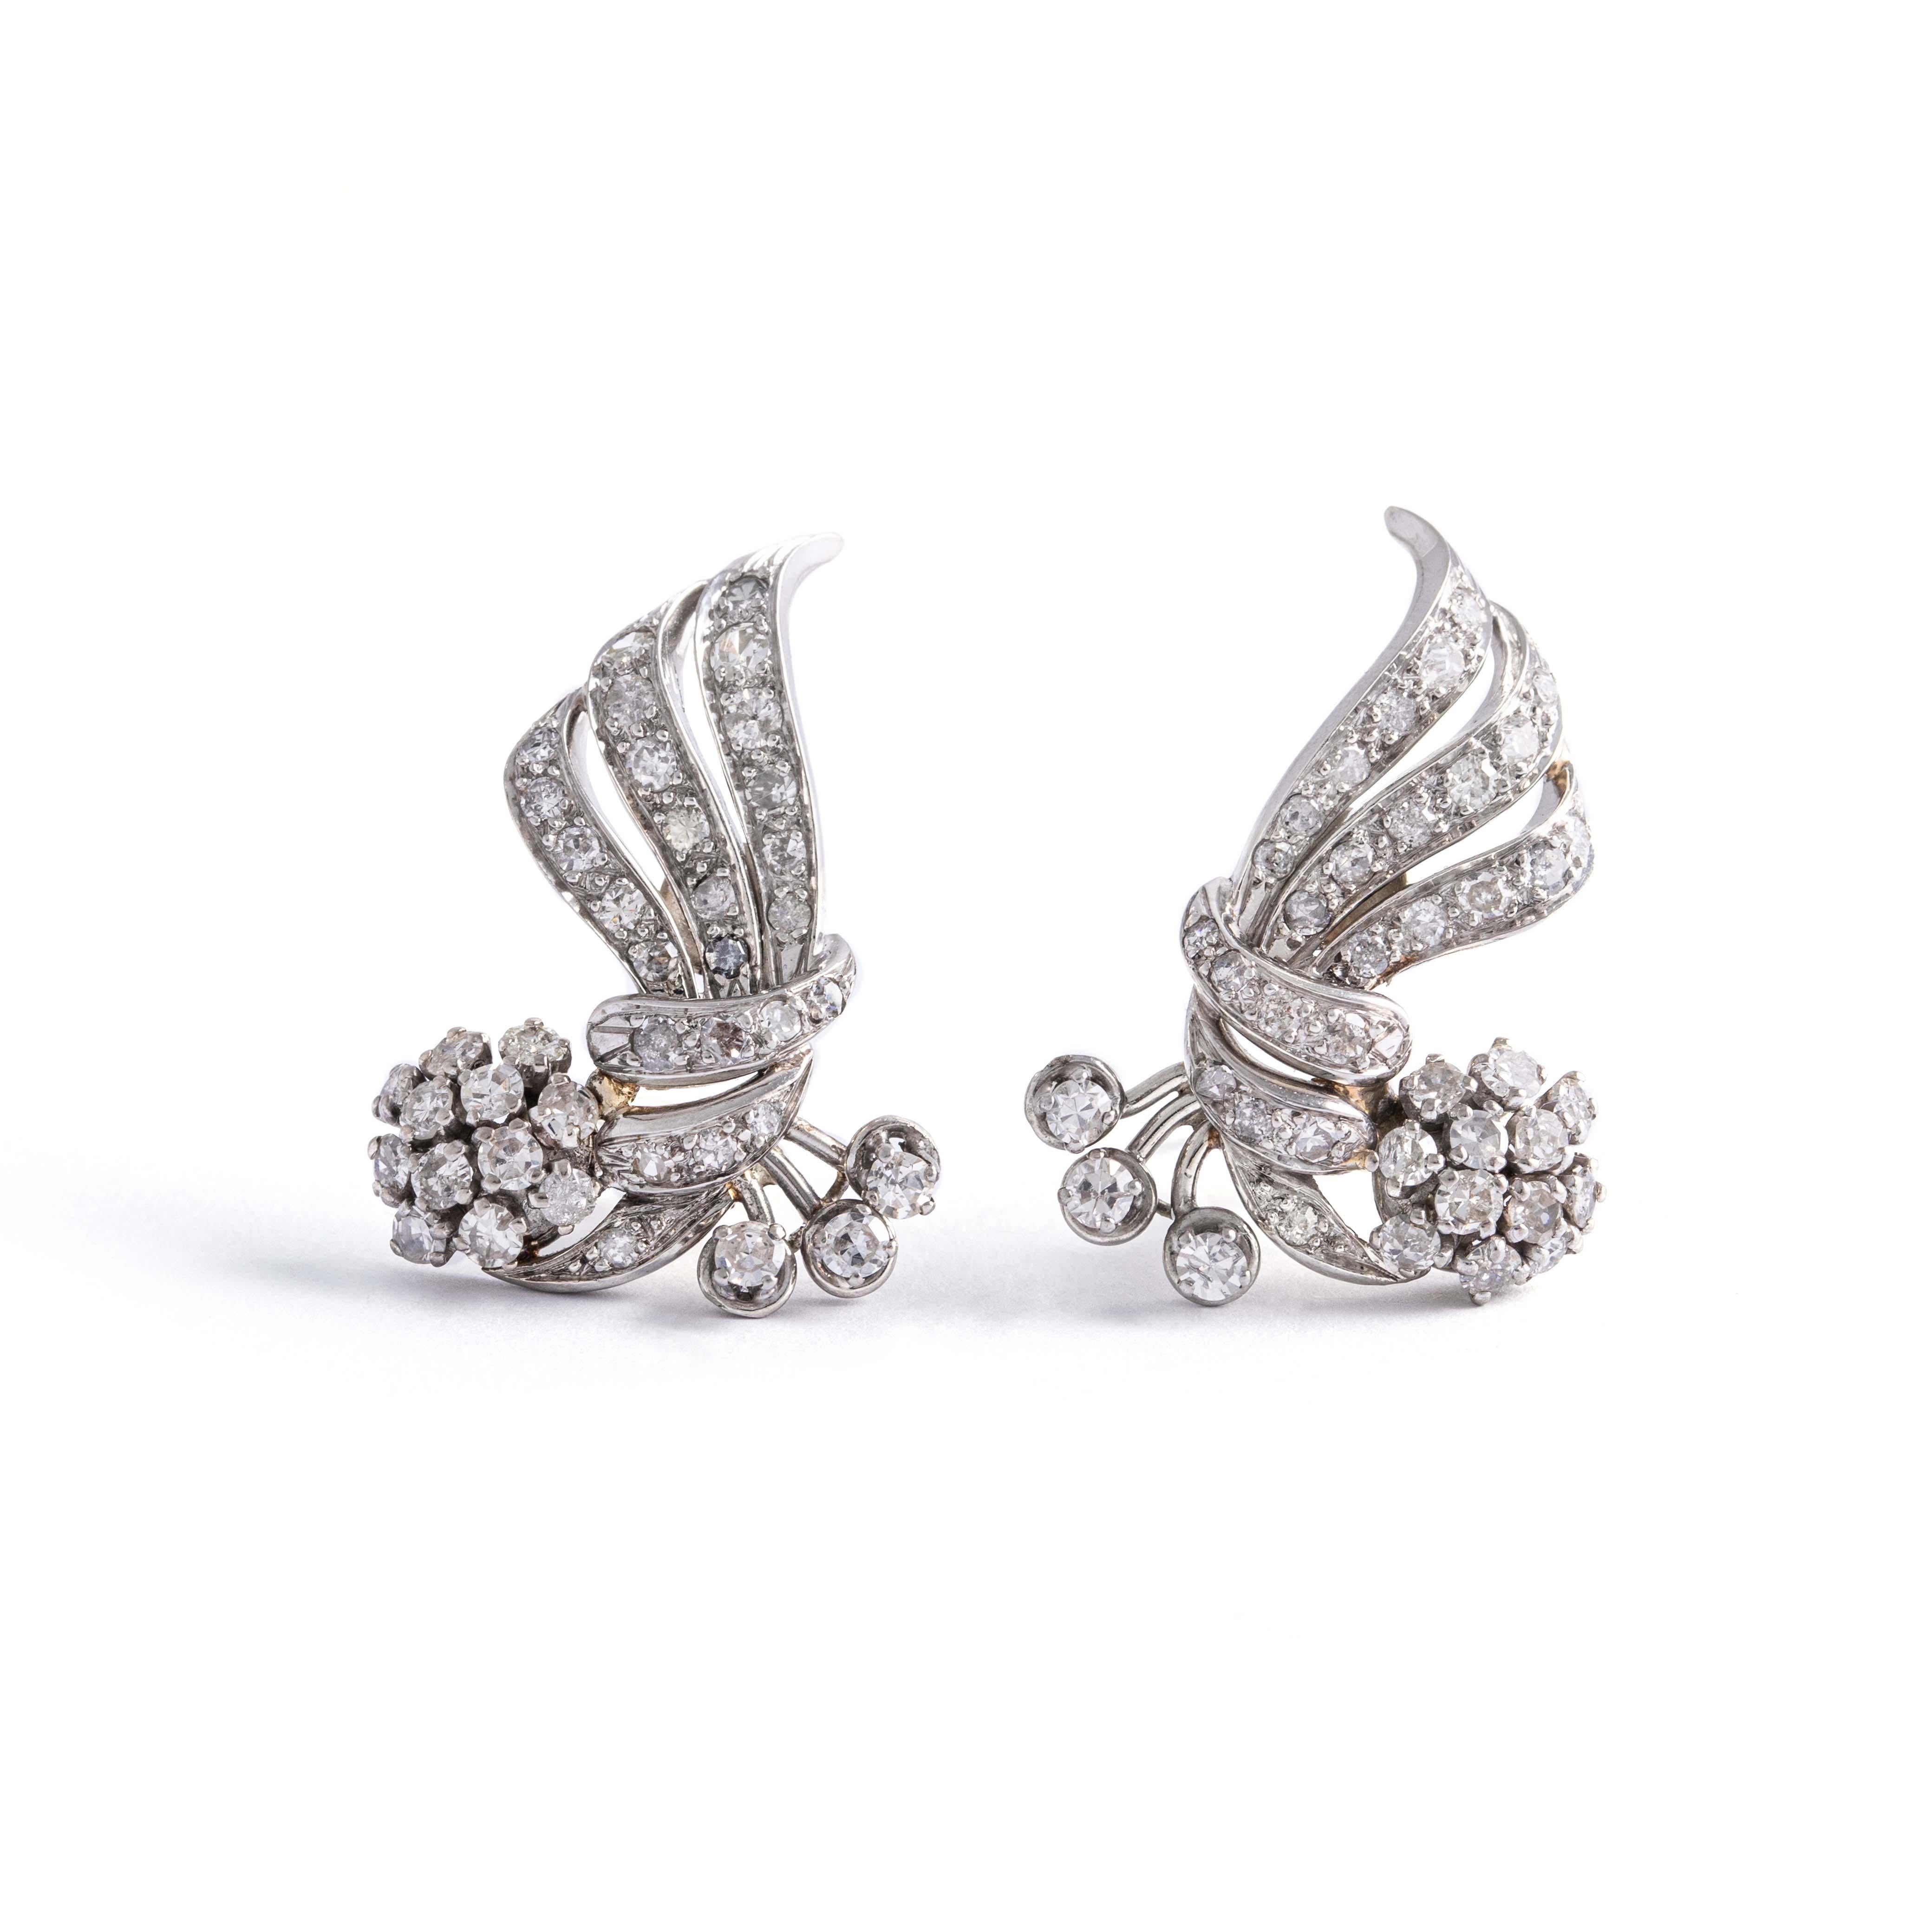 18K white gold earrings set with round-cut diamonds, some 8/8 cut.
Dimensions: 3.00 x 2.25 centimeters. 
Gross weight: 11.26 grams.